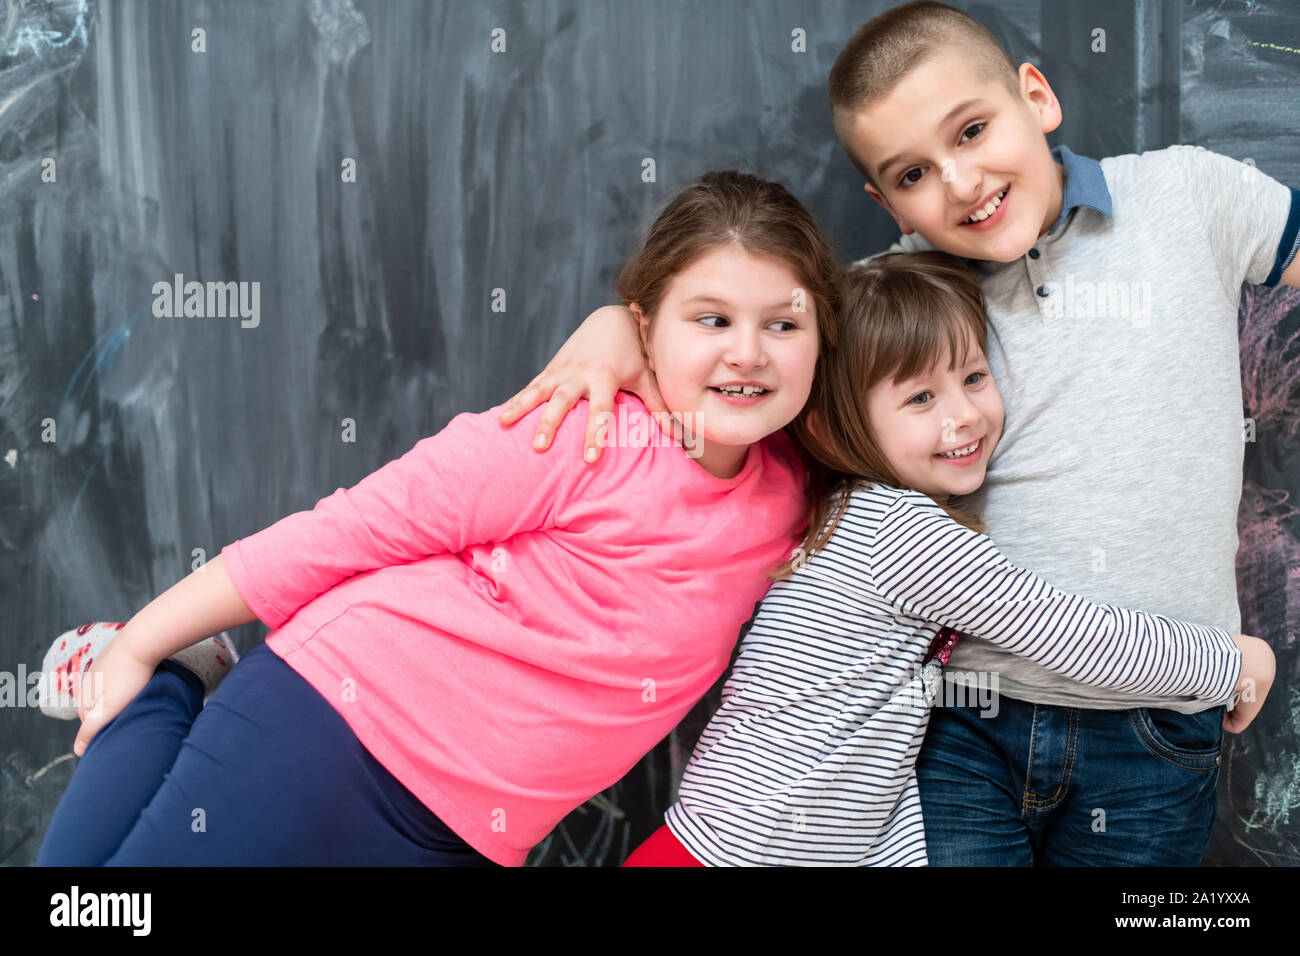 group portrait of happy kids hugging each other while having fun in front of black chalkboard Stock Photo